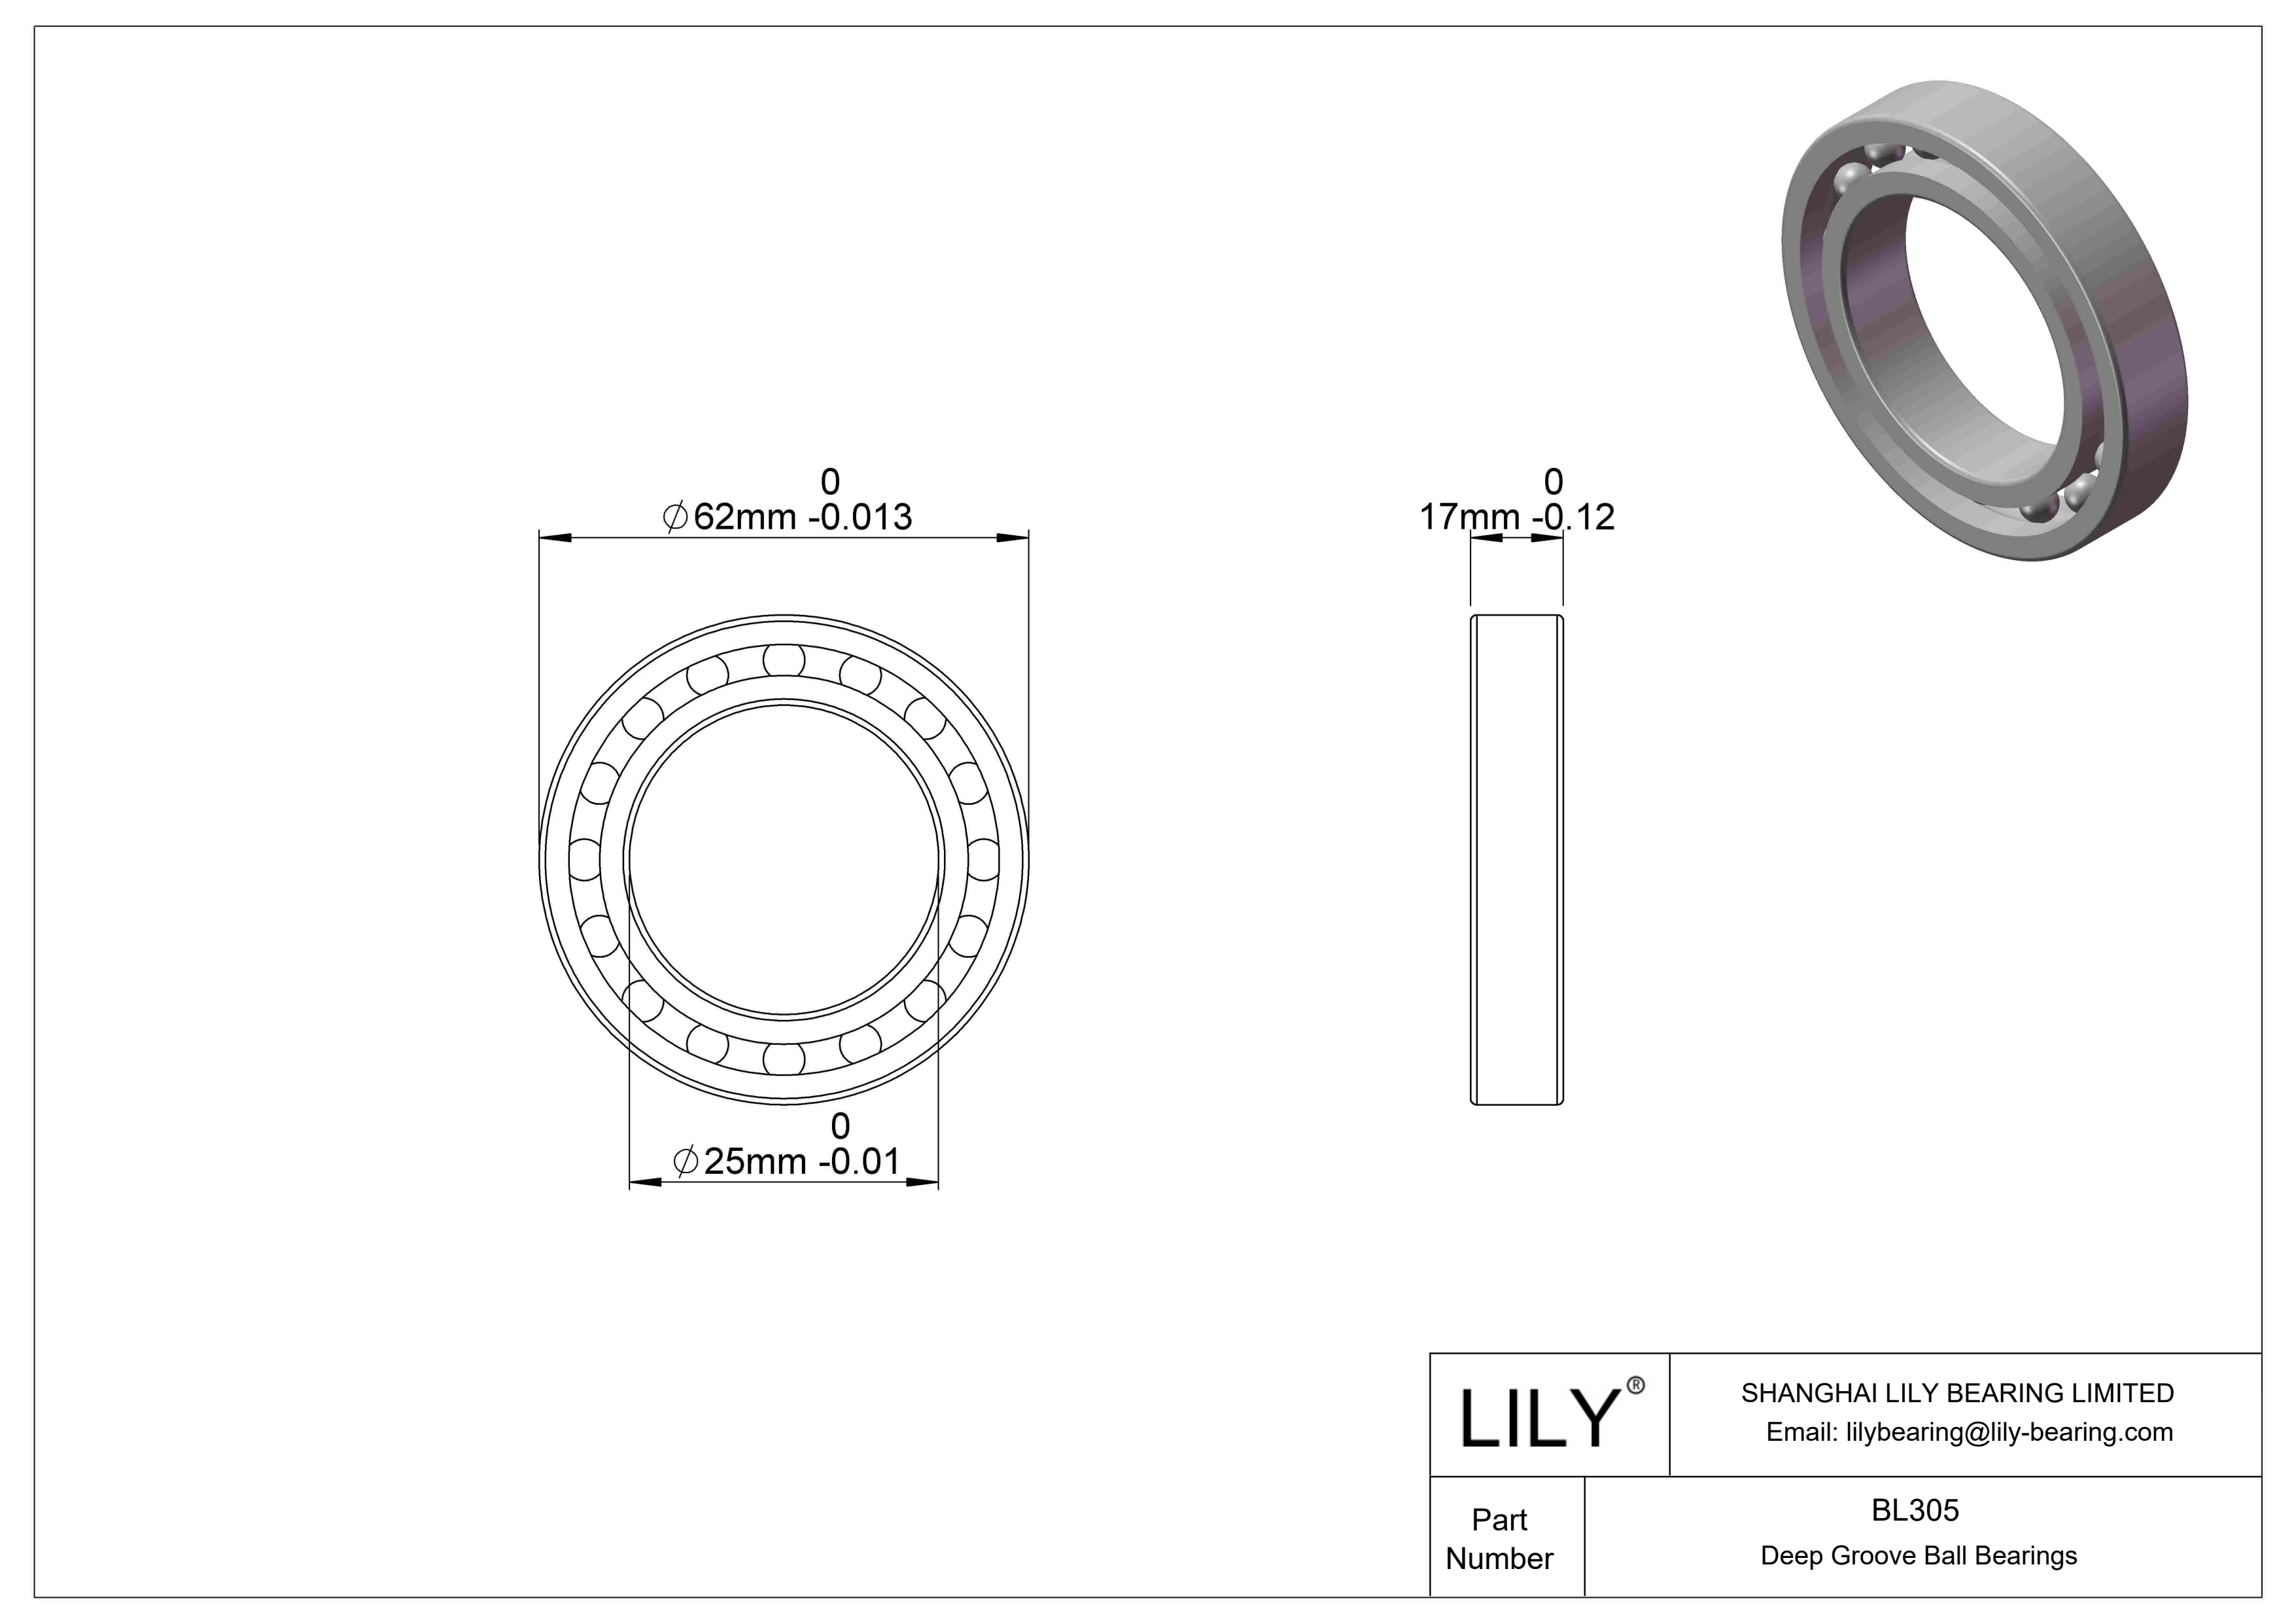 BL305 General Deep Groove Ball Bearing cad drawing